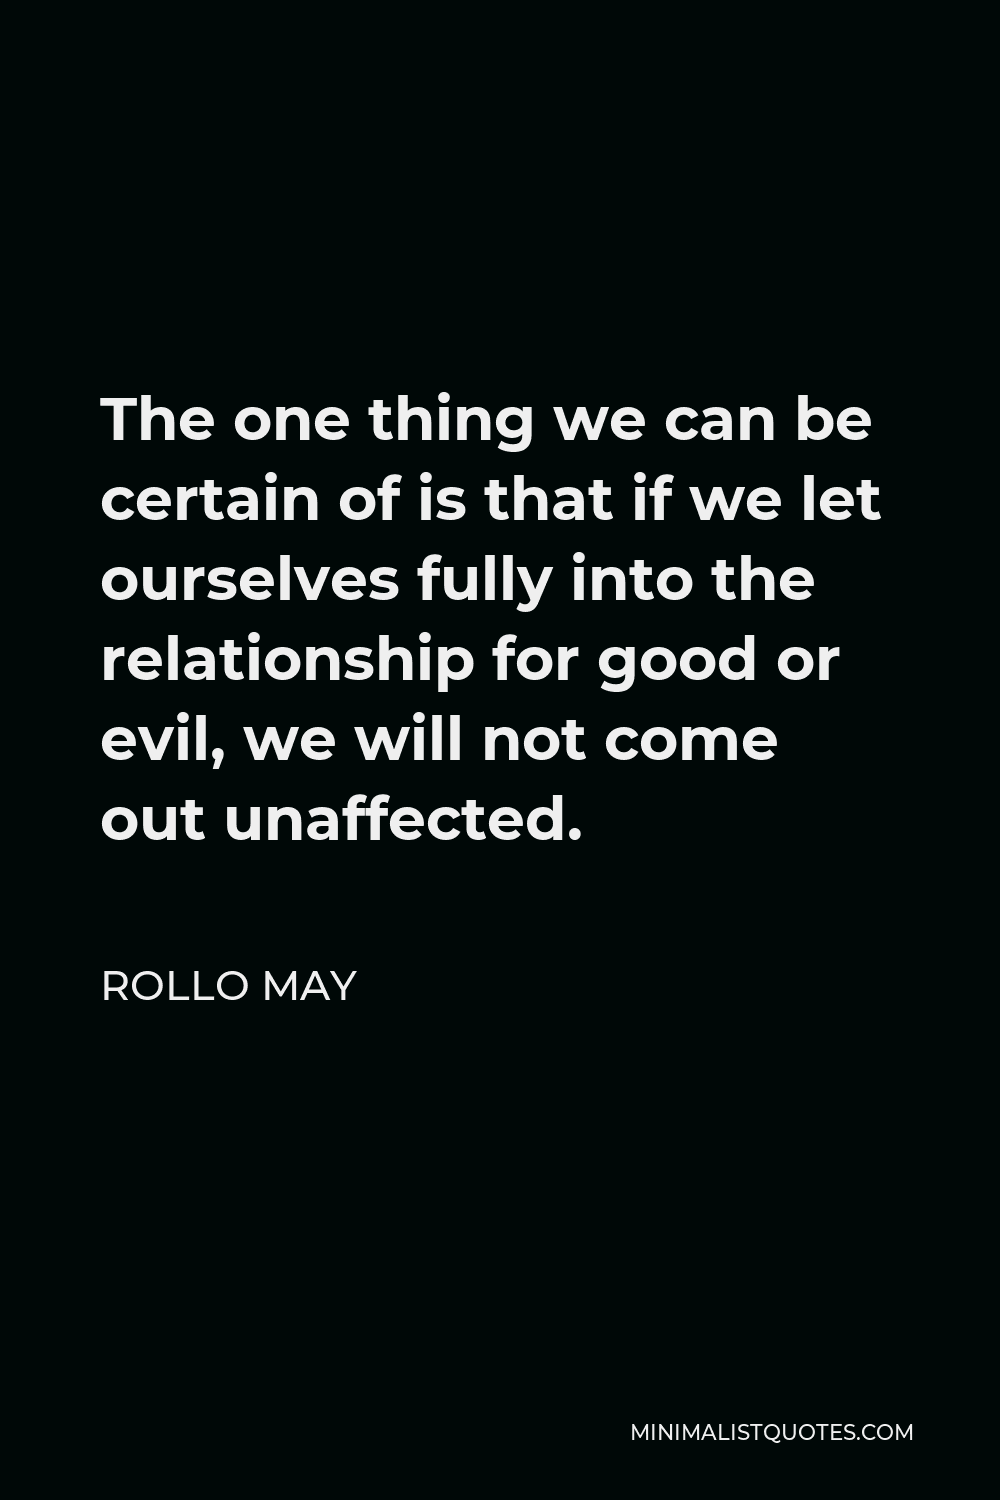 Rollo May Quote - The one thing we can be certain of is that if we let ourselves fully into the relationship for good or evil, we will not come out unaffected.